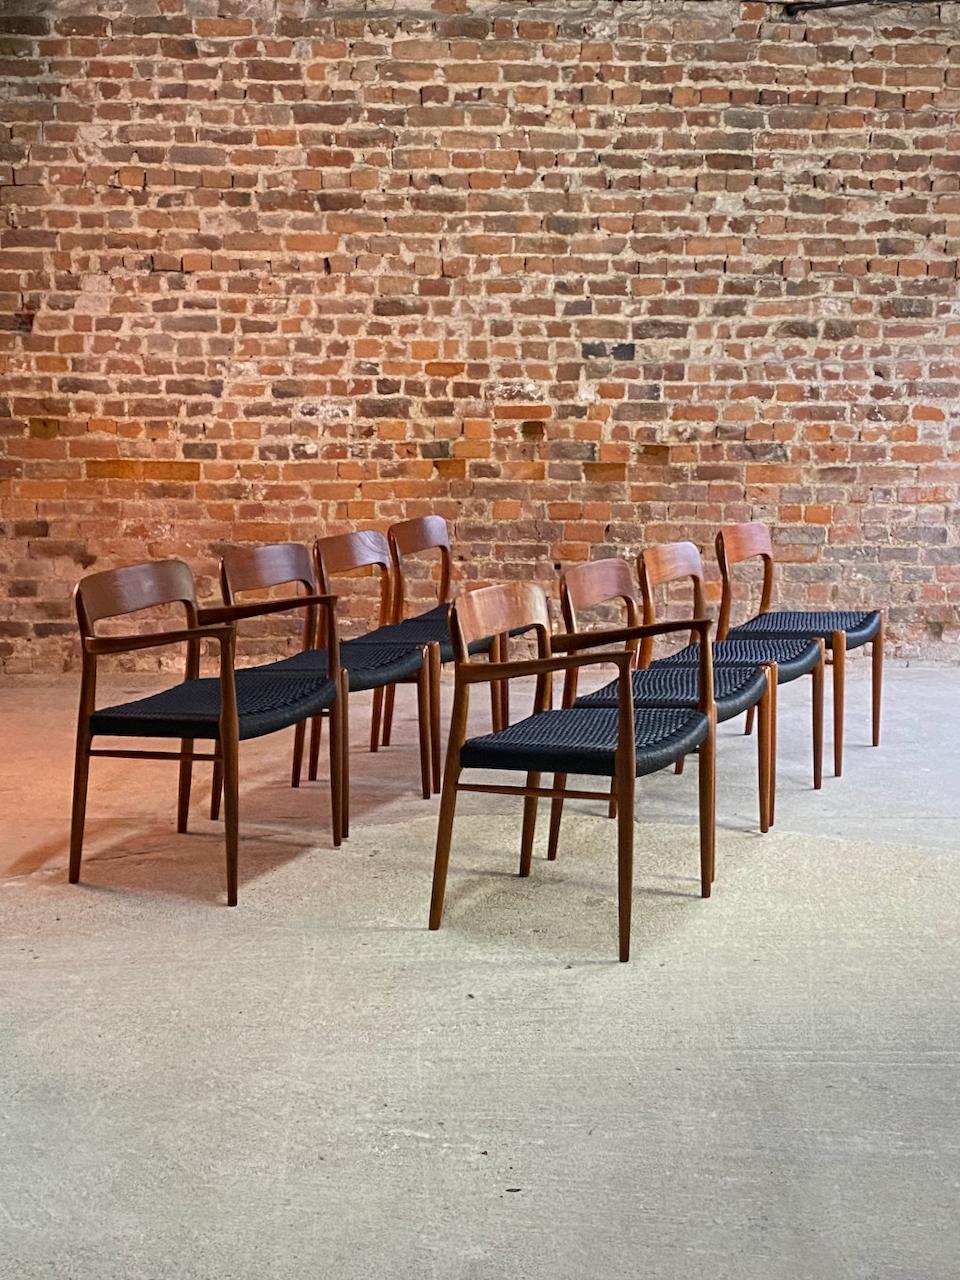 Niels Moller Model 56 & 75 Teak & Black Papercord Dining Chairs Set of 8

Magnificent set of eight Niels Otto Møller Model 56 (2) and Model 75 (6) Teak & Black papercord dining chairs manufactured by J.L. Møllers Møbelfabrik Denmark, circa 1960,